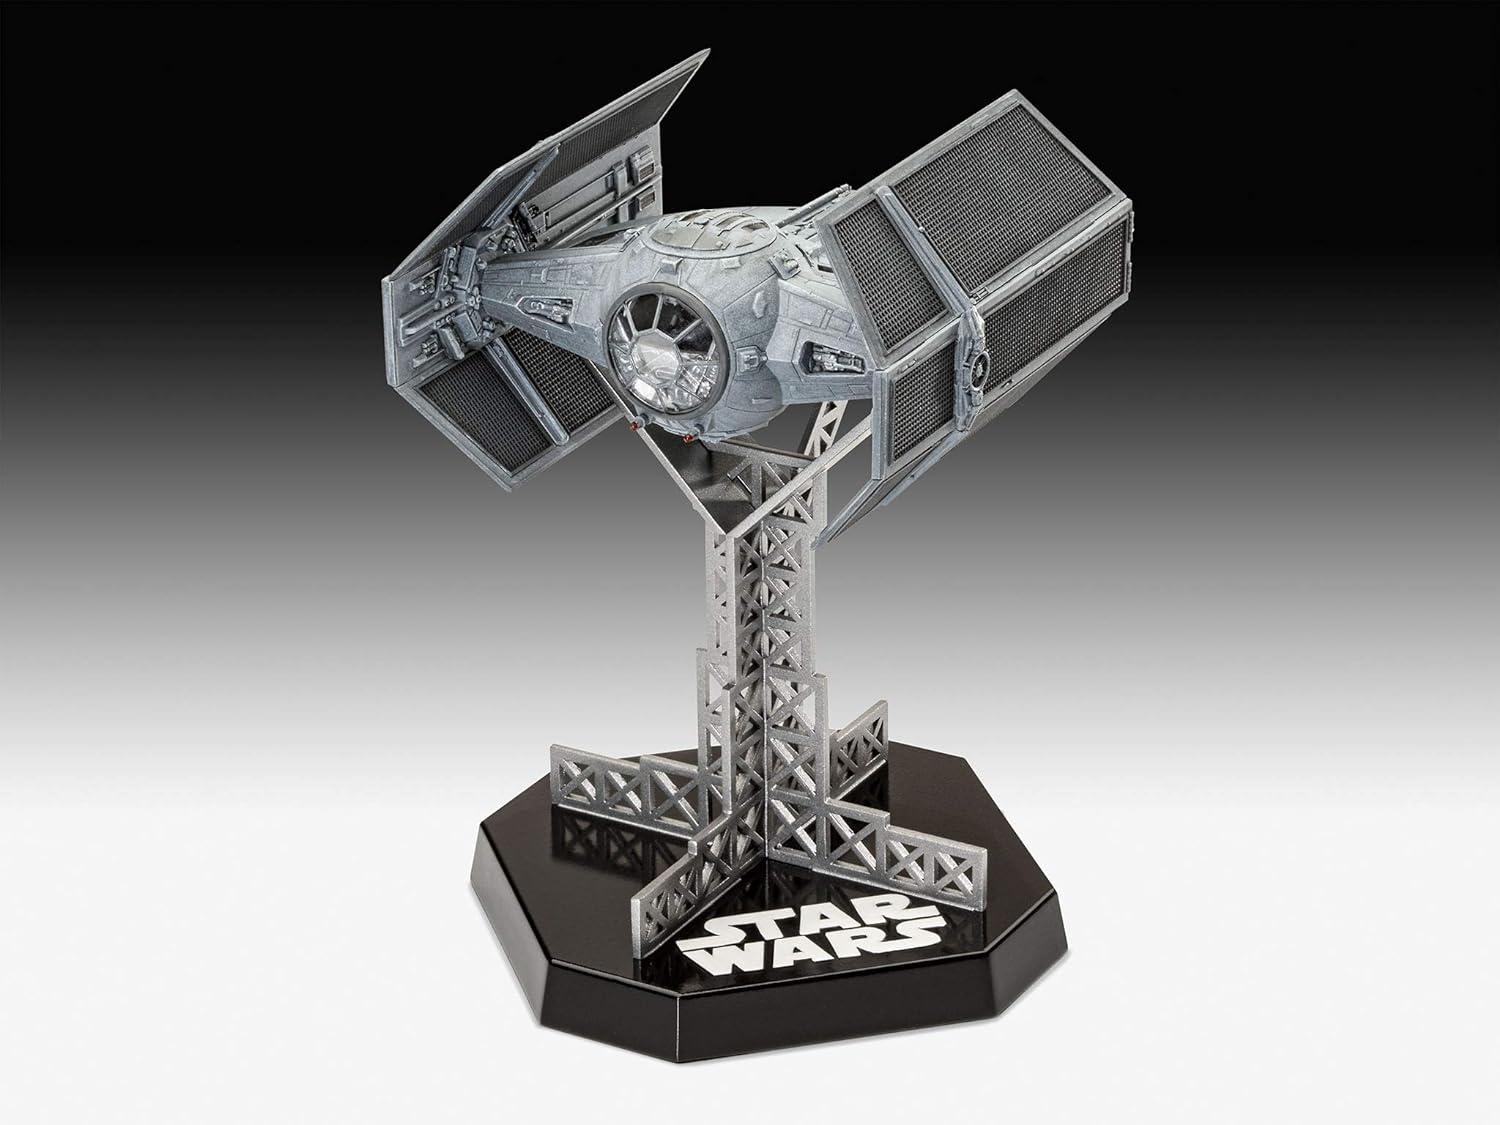 Darth Vaders TIE Fighter 1:72 Scale Kit